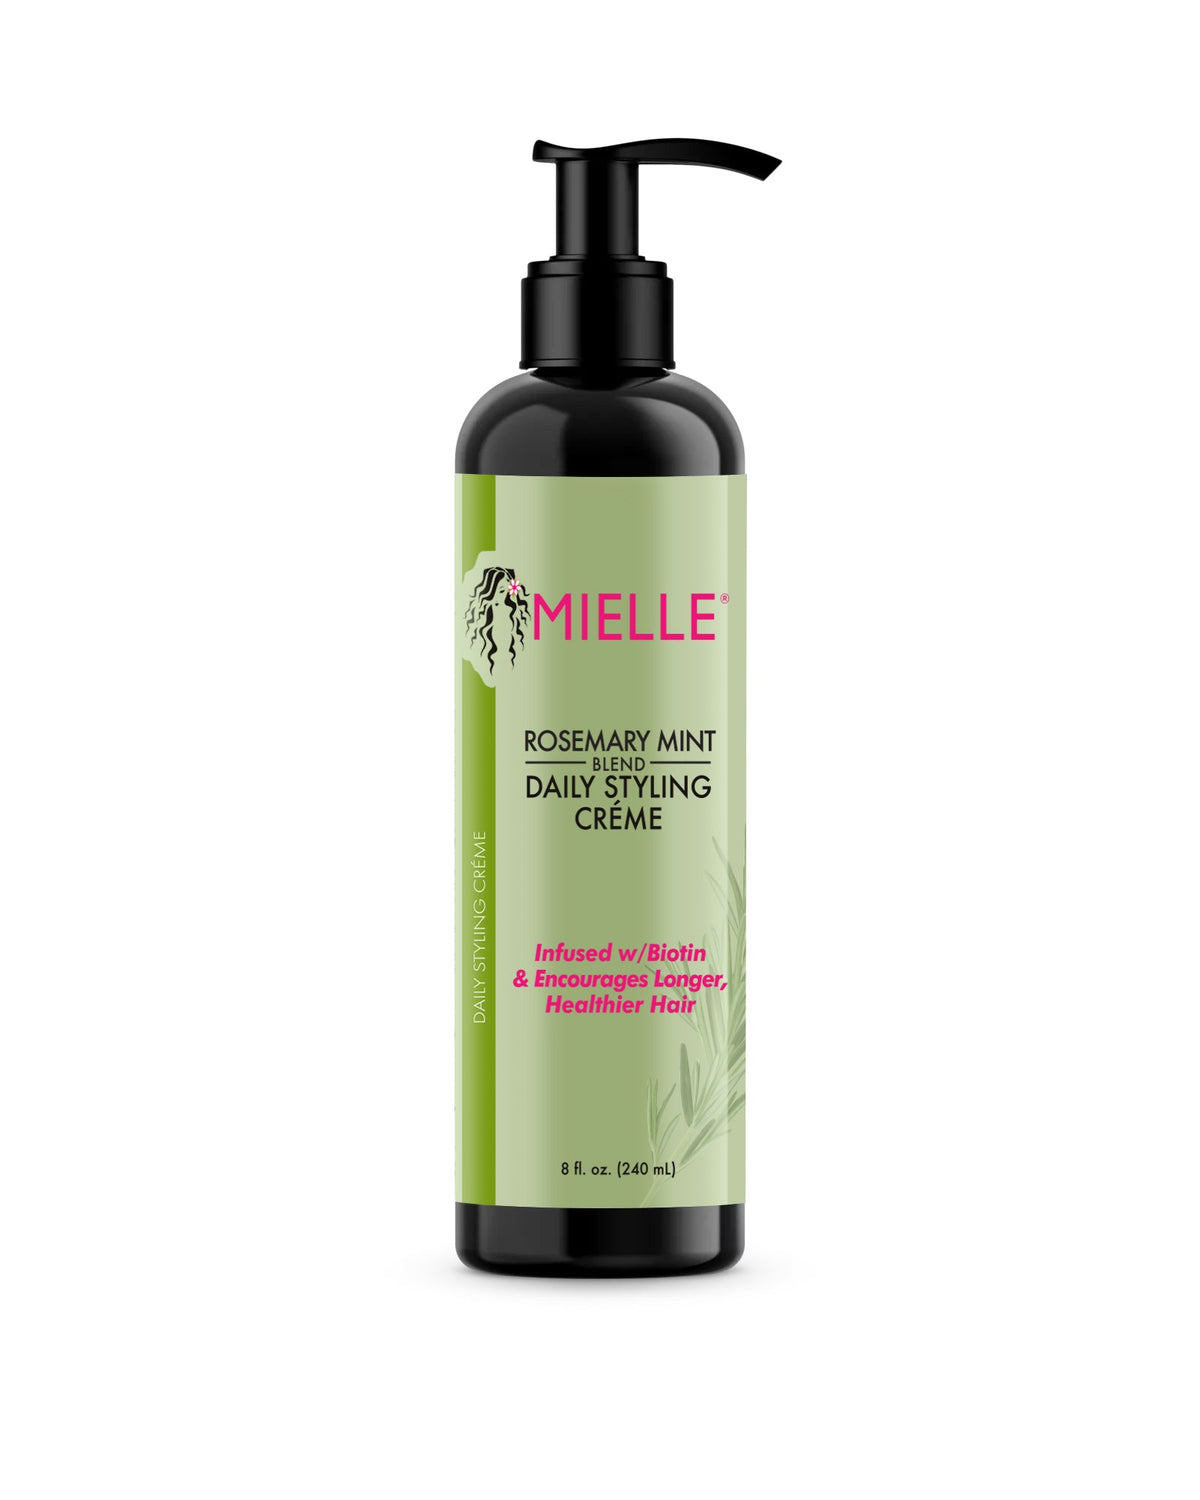 Mielle - Rosemary Mint Daily Styling Crème 240ml